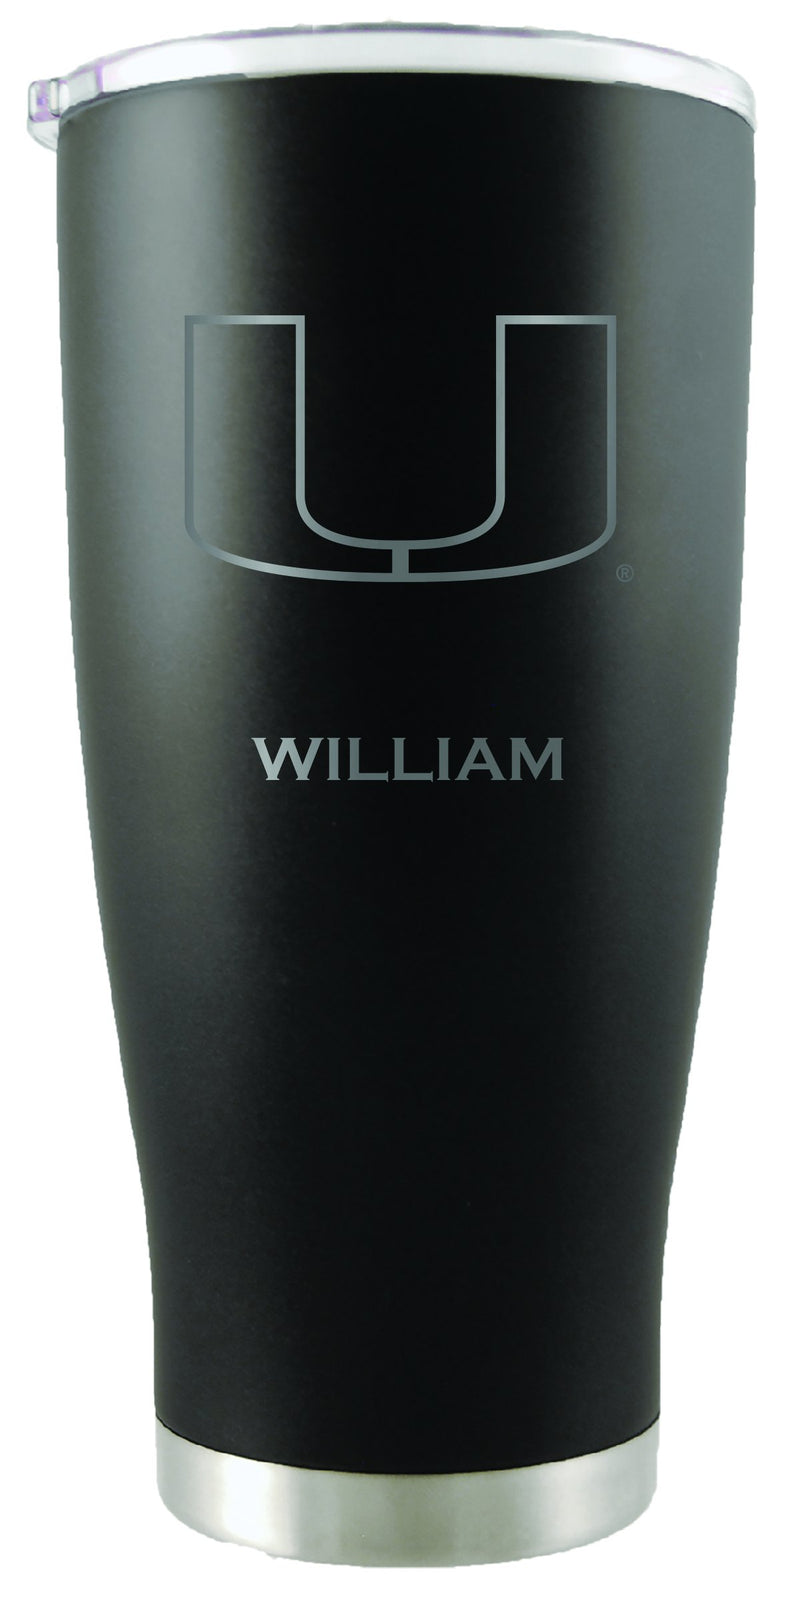 20oz Black Personalized Stainless Steel Tumbler | Miami
COL, CurrentProduct, Drinkware_category_All, MIA, Miami Hurricanes, Personalized_Personalized
The Memory Company